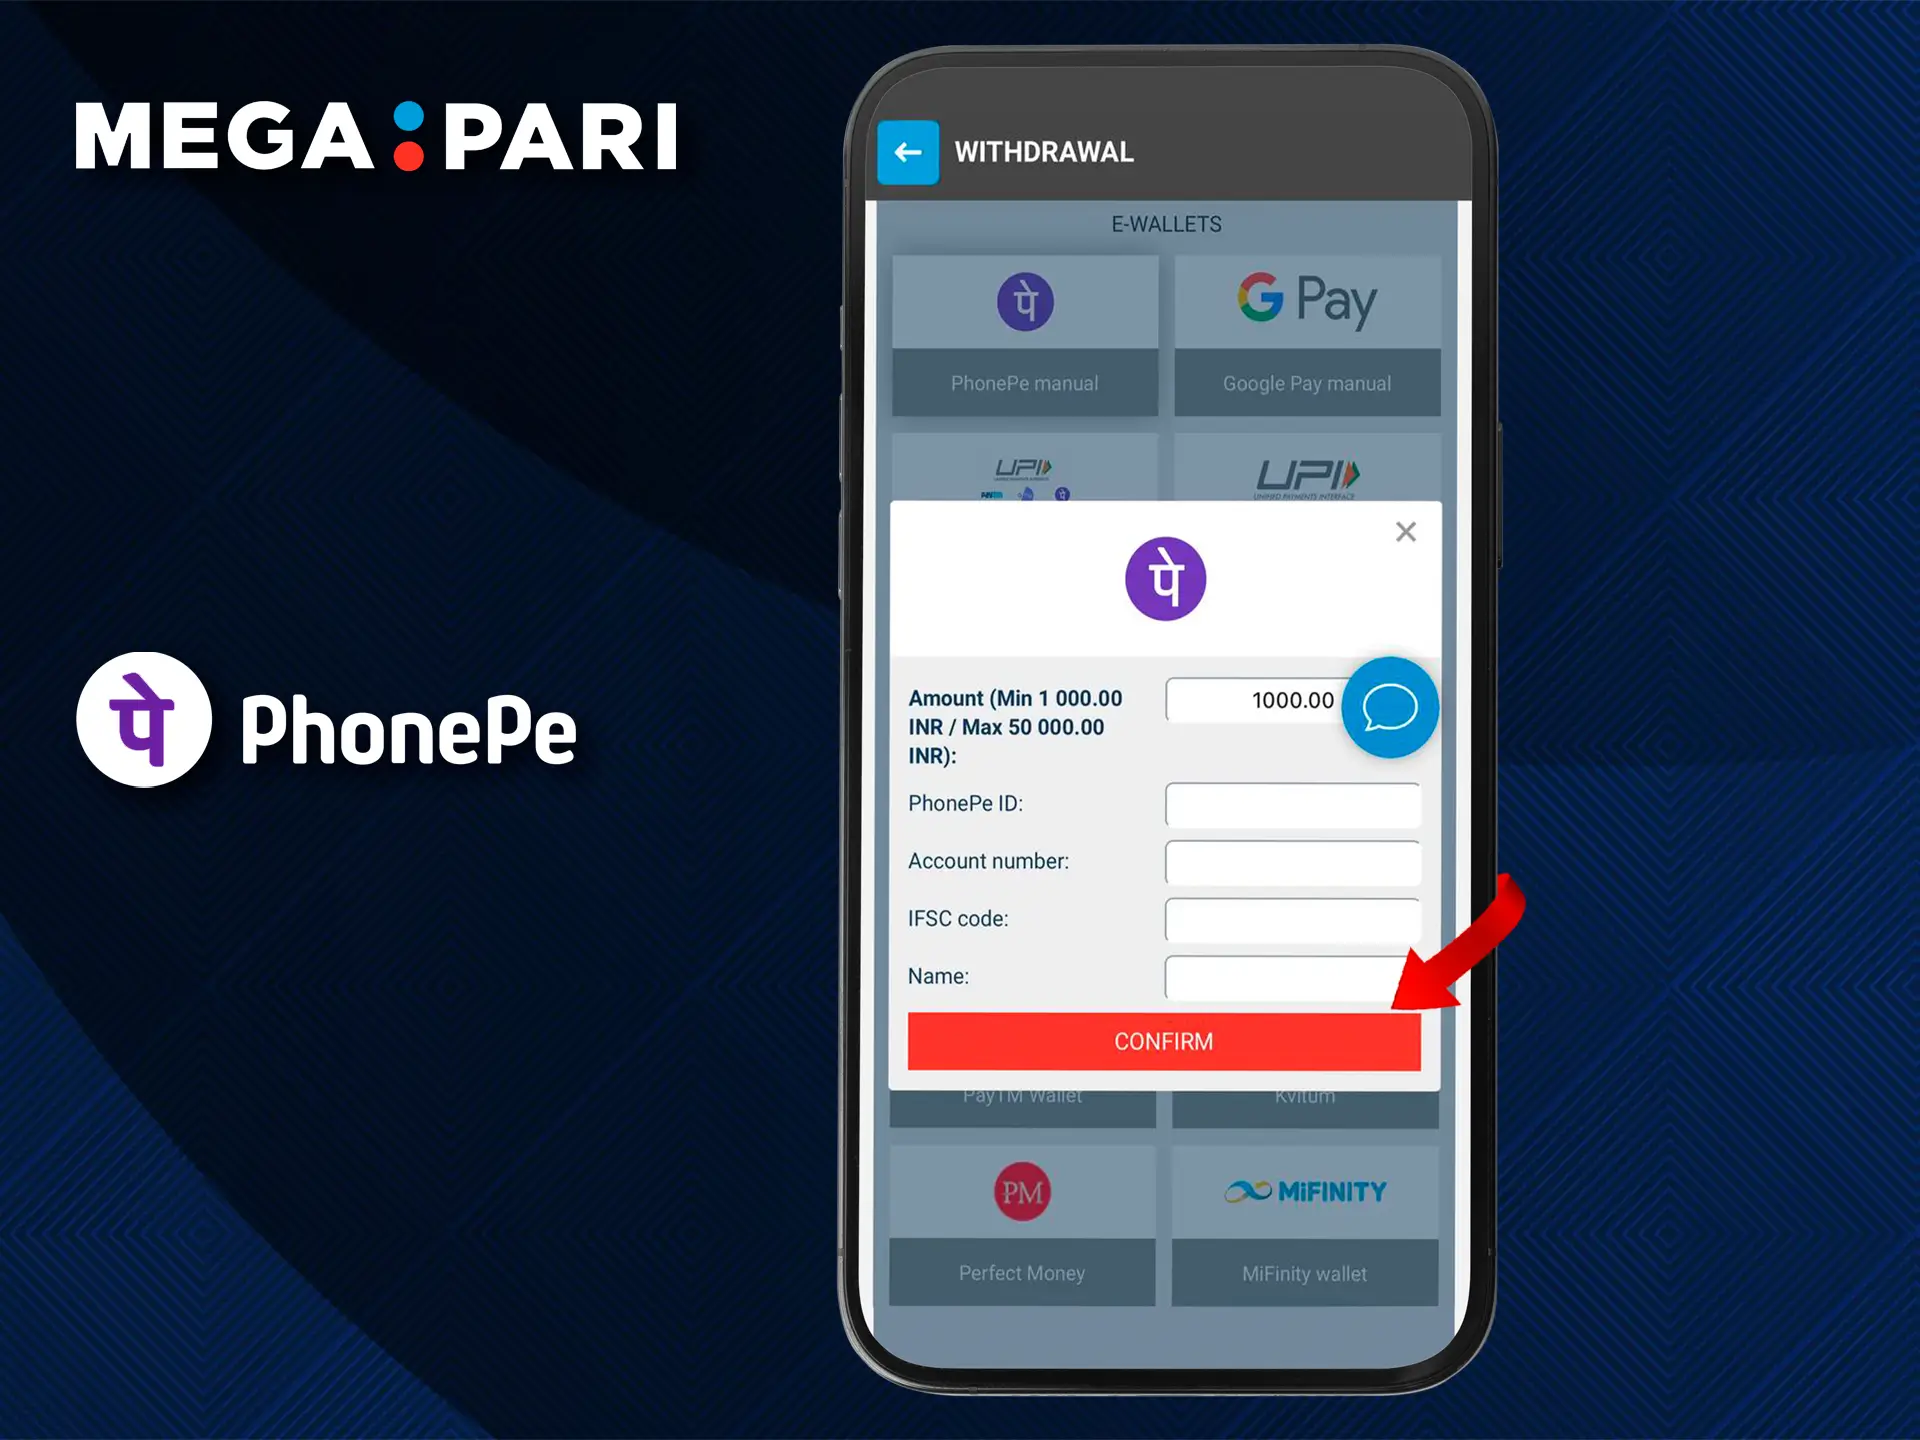 Enter the amount you need and confirm your withdrawal from Megapari Casino via PhonePe.